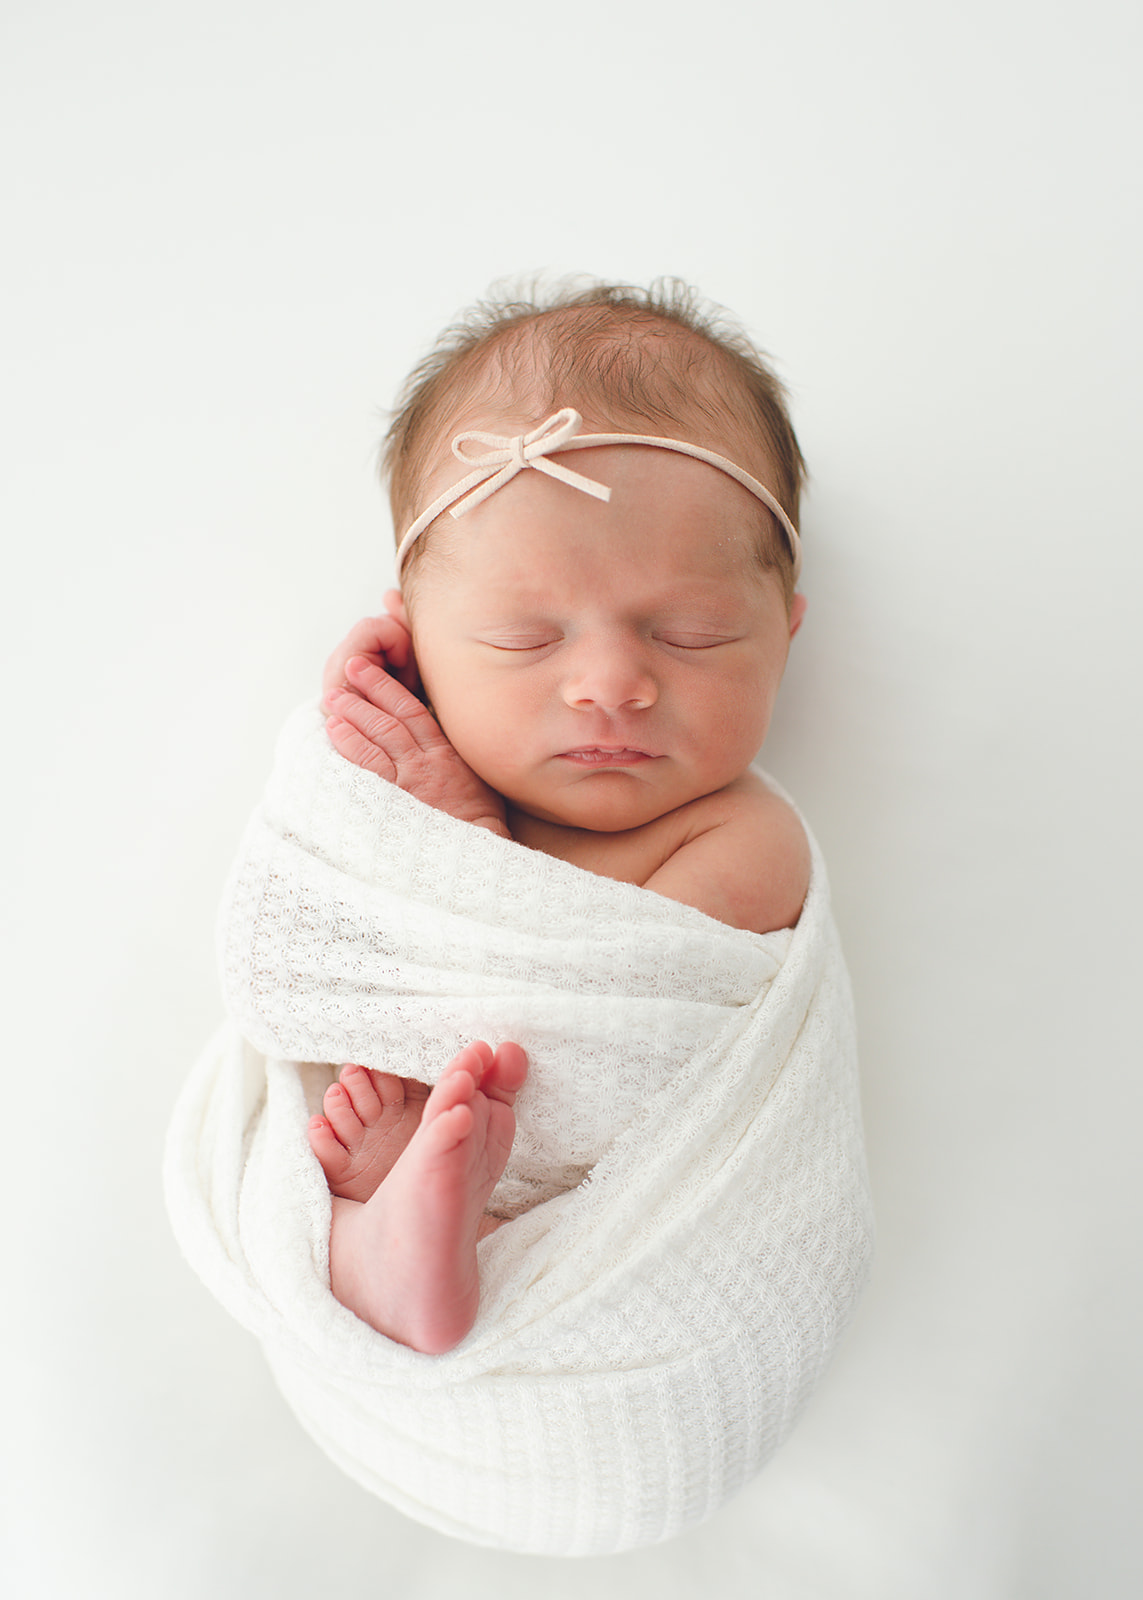 Newborn baby wrapped for photoshoot